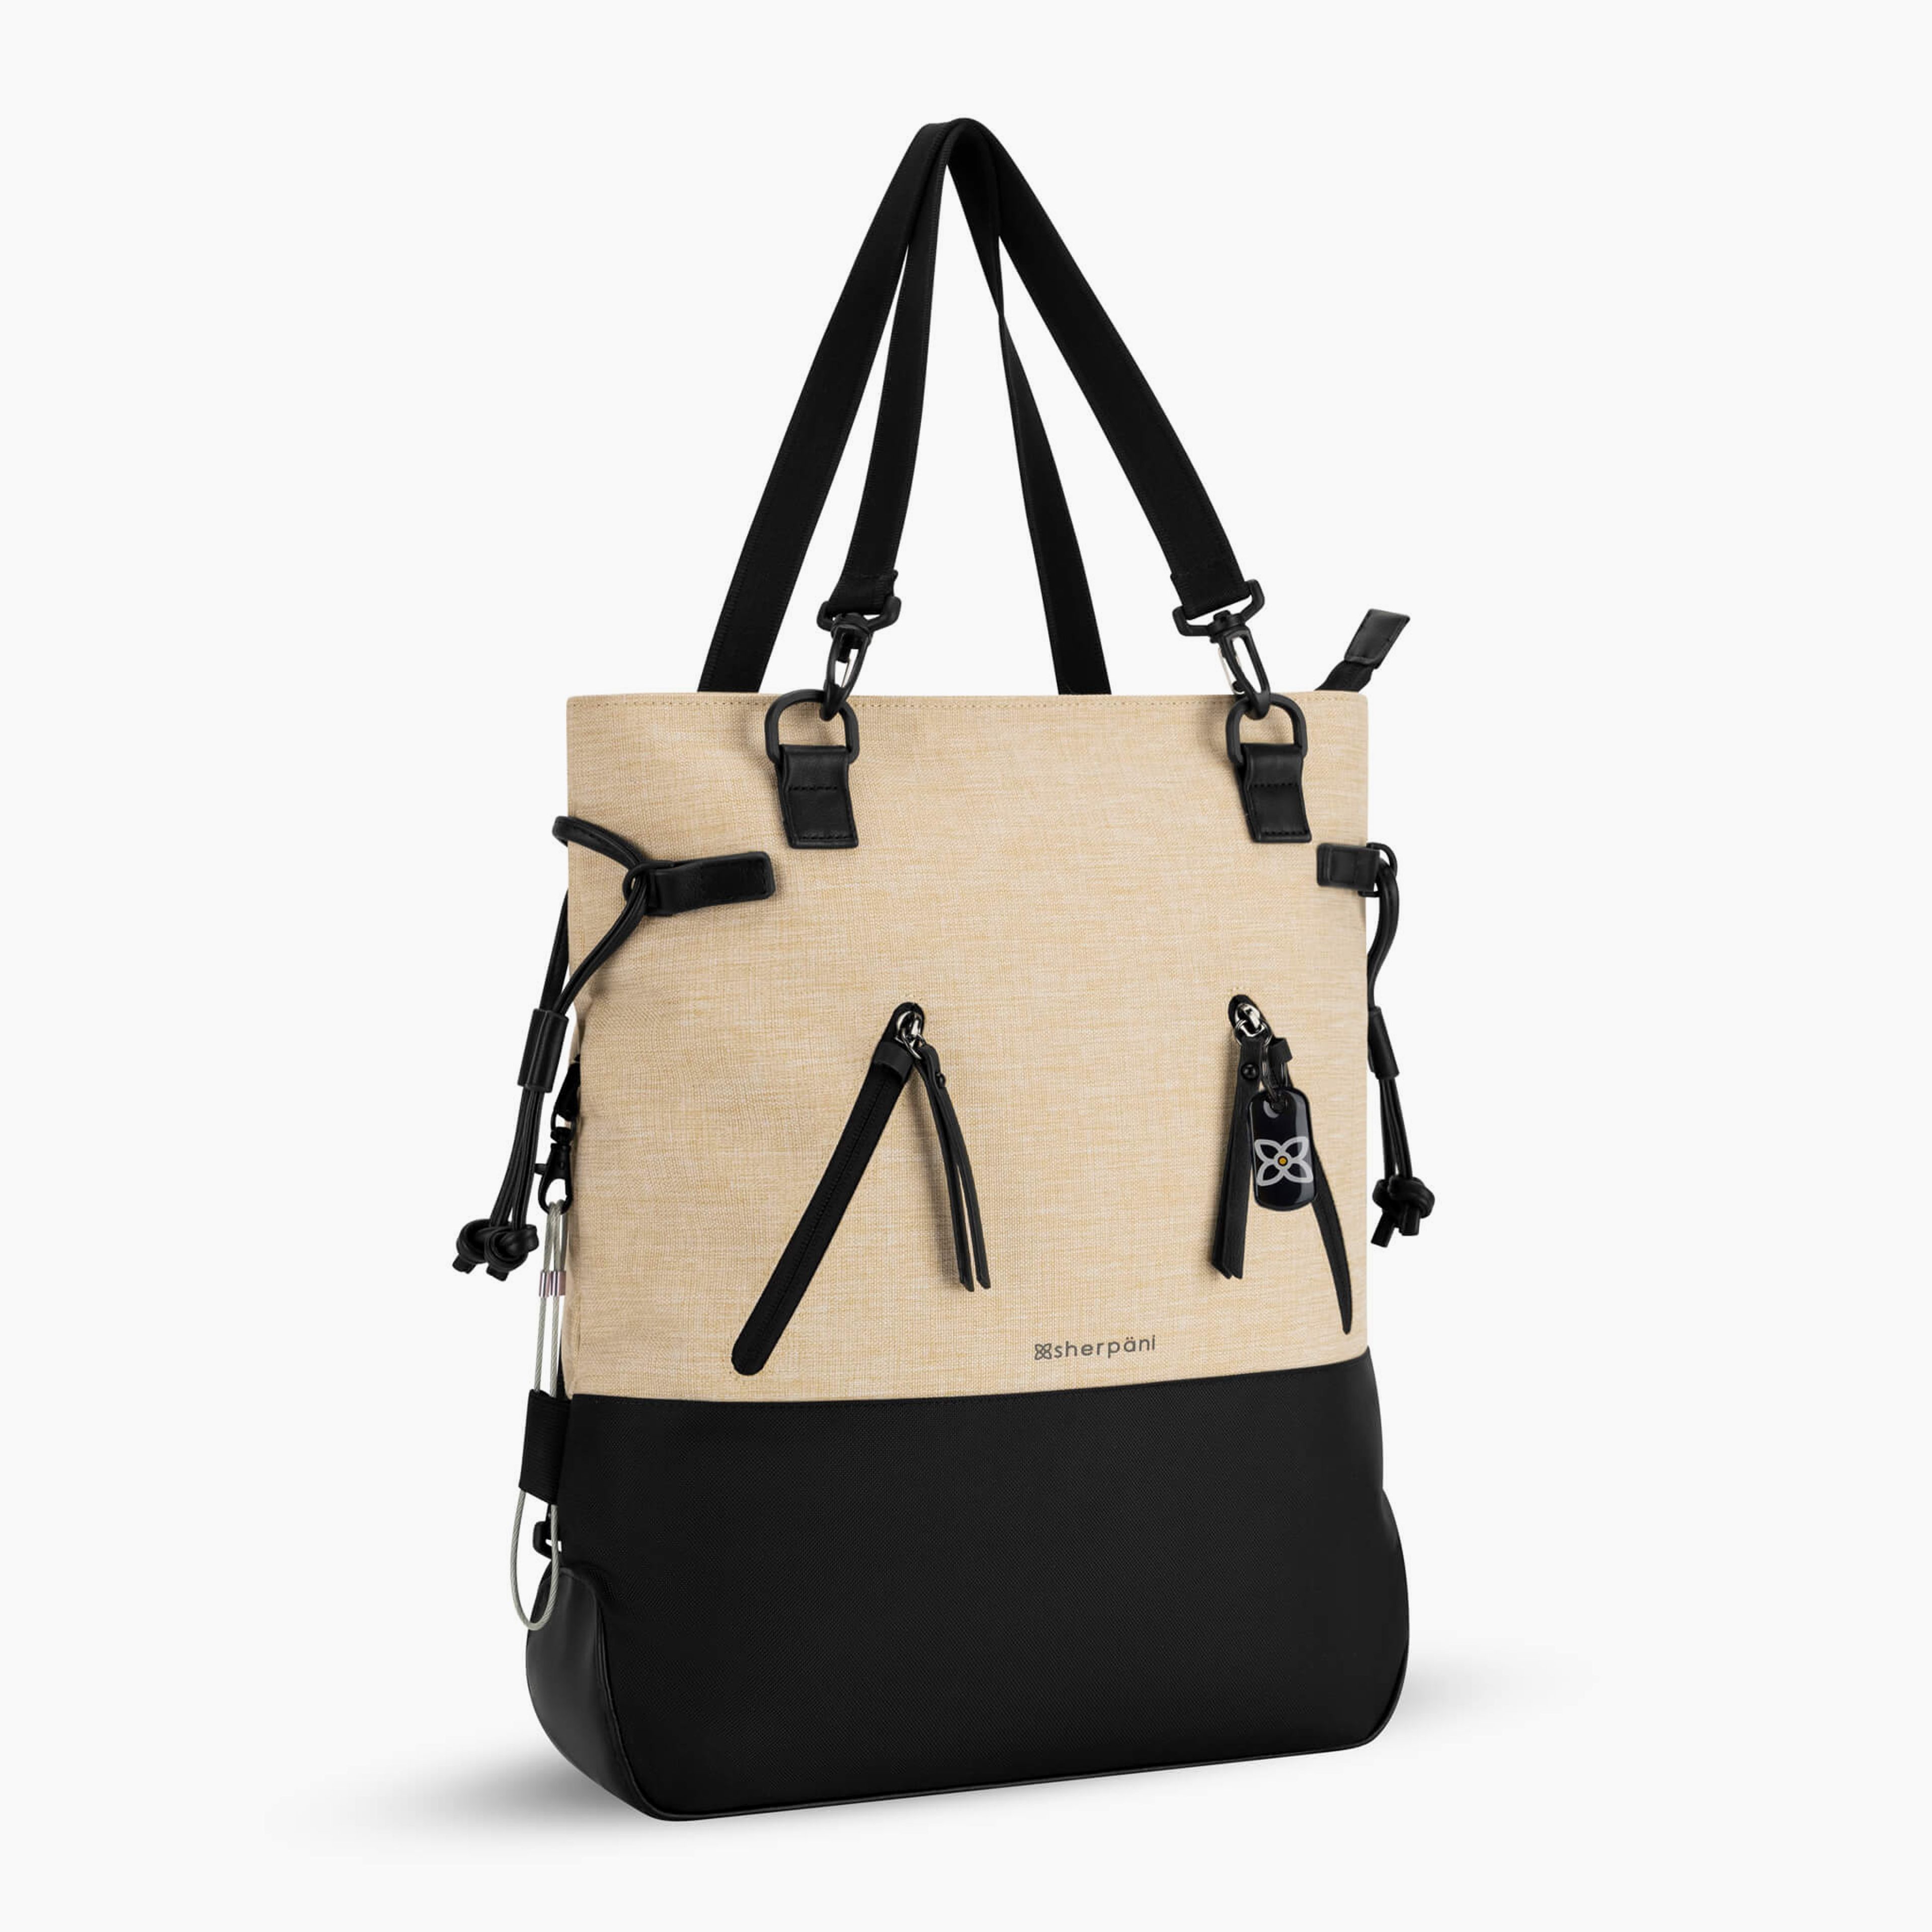 Tempest | Convertible Travel Tote